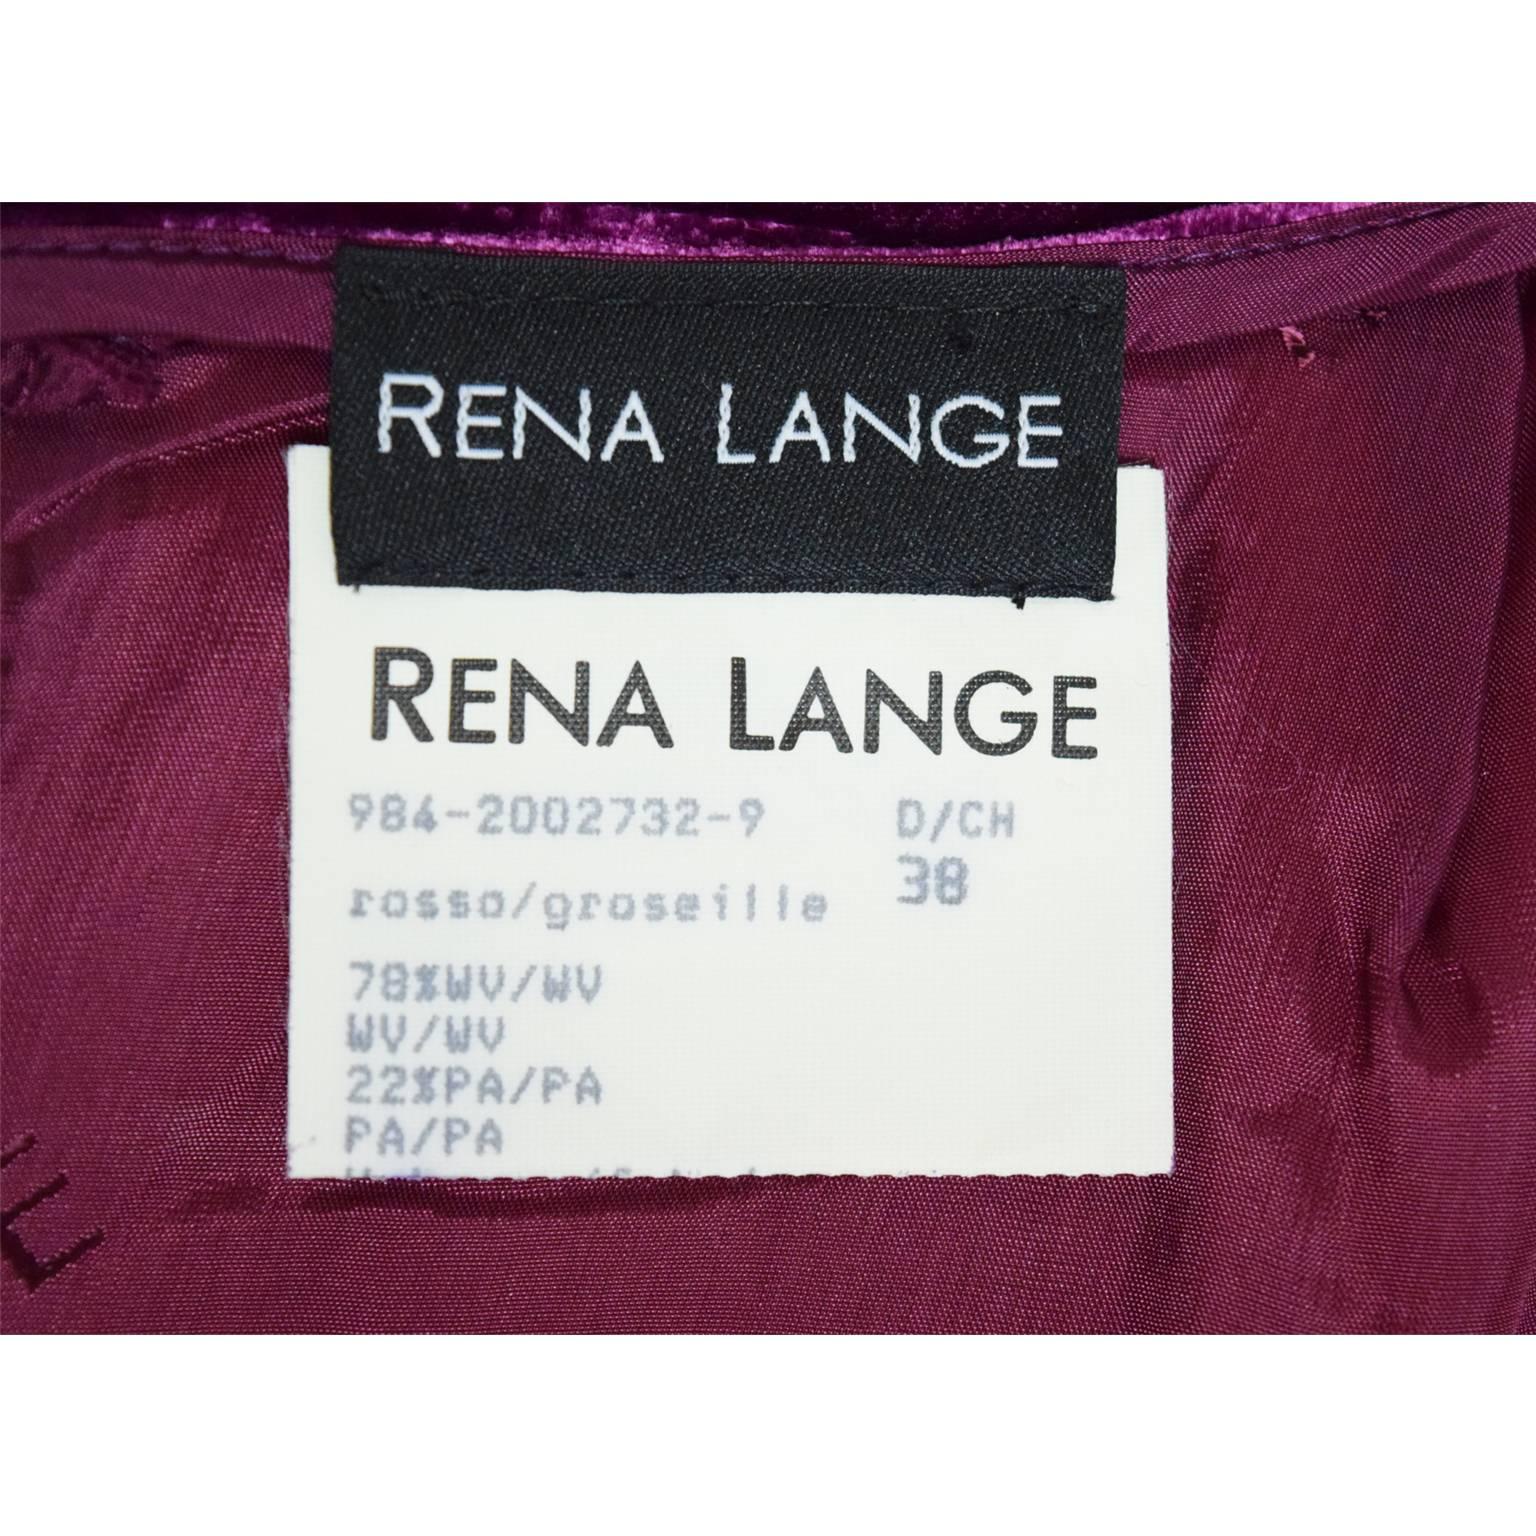 Rena Lange Three Piece Topper Jacket, Silk Blouse, and Skirt Ensemble  For Sale 3